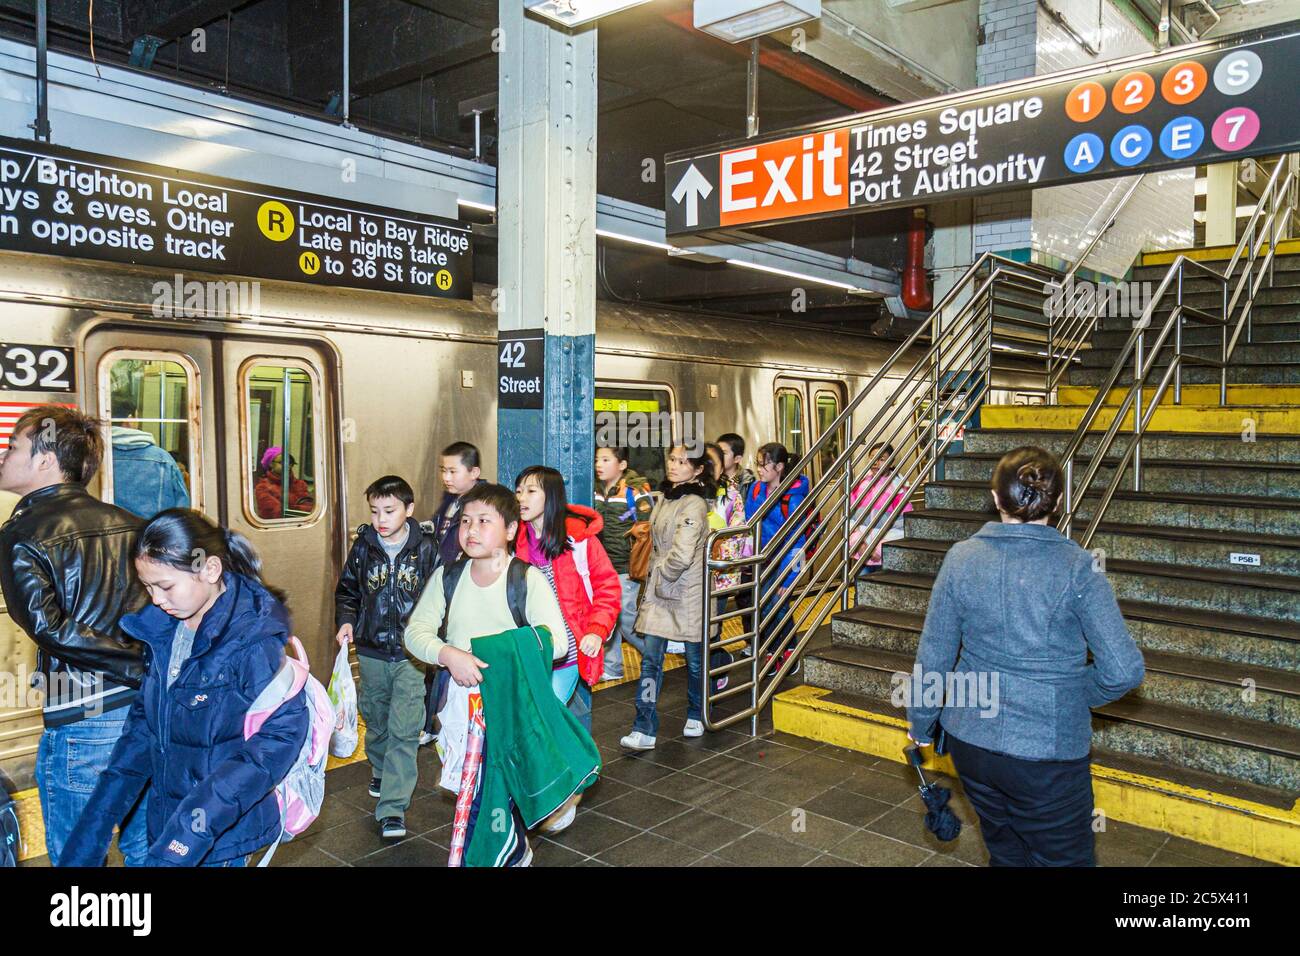 New York City,NYC NY Manhattan,Midtown,MTA,New York City,Subway system,Times Square Station,A C E N R Q S 1 2 3 7 highway Route,platform,train,sign,st Stock Photo